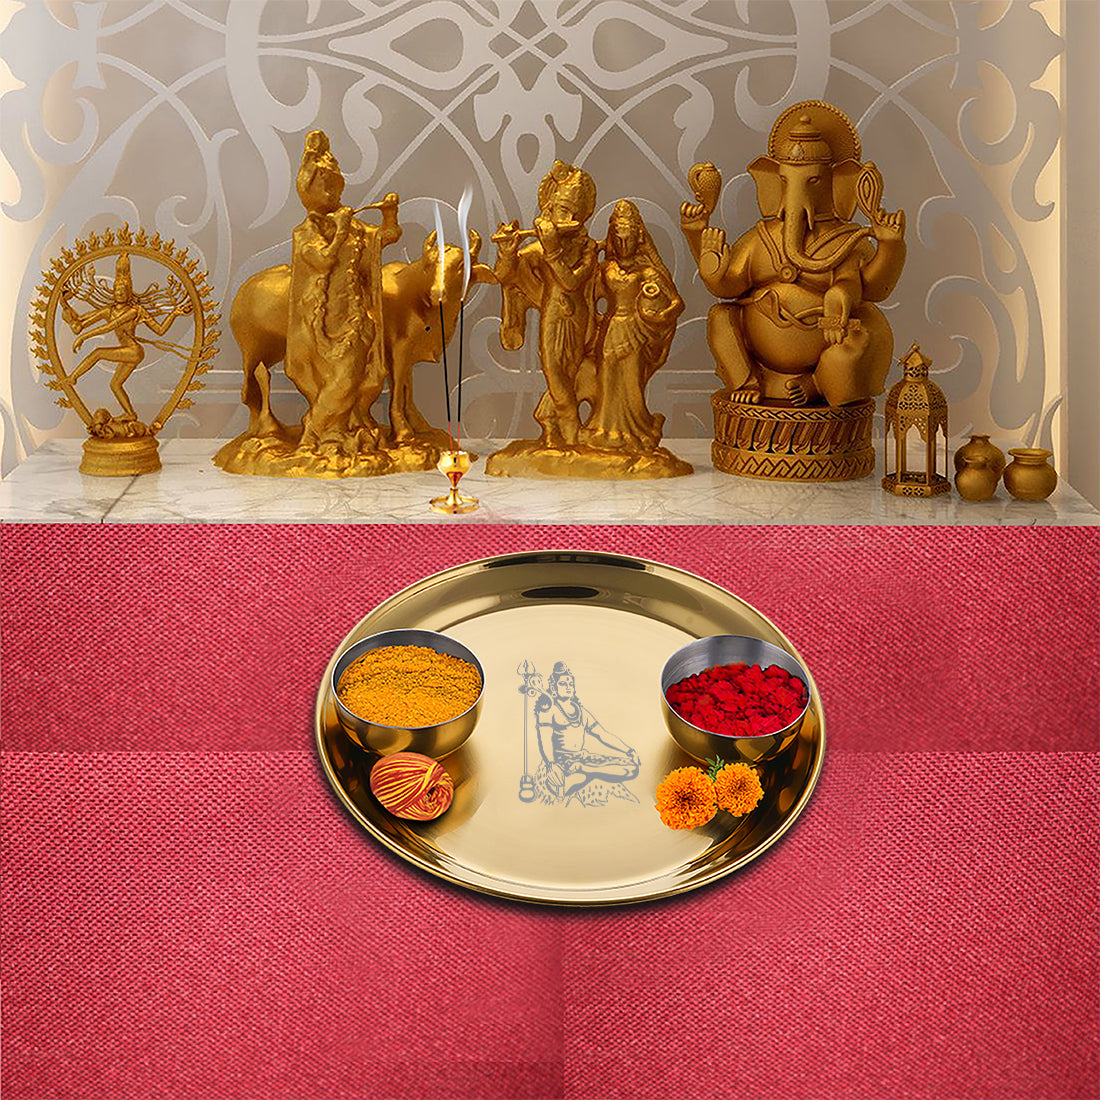 Stainless Steel Pooja Thali Set with Gold PVD Coating Shiv